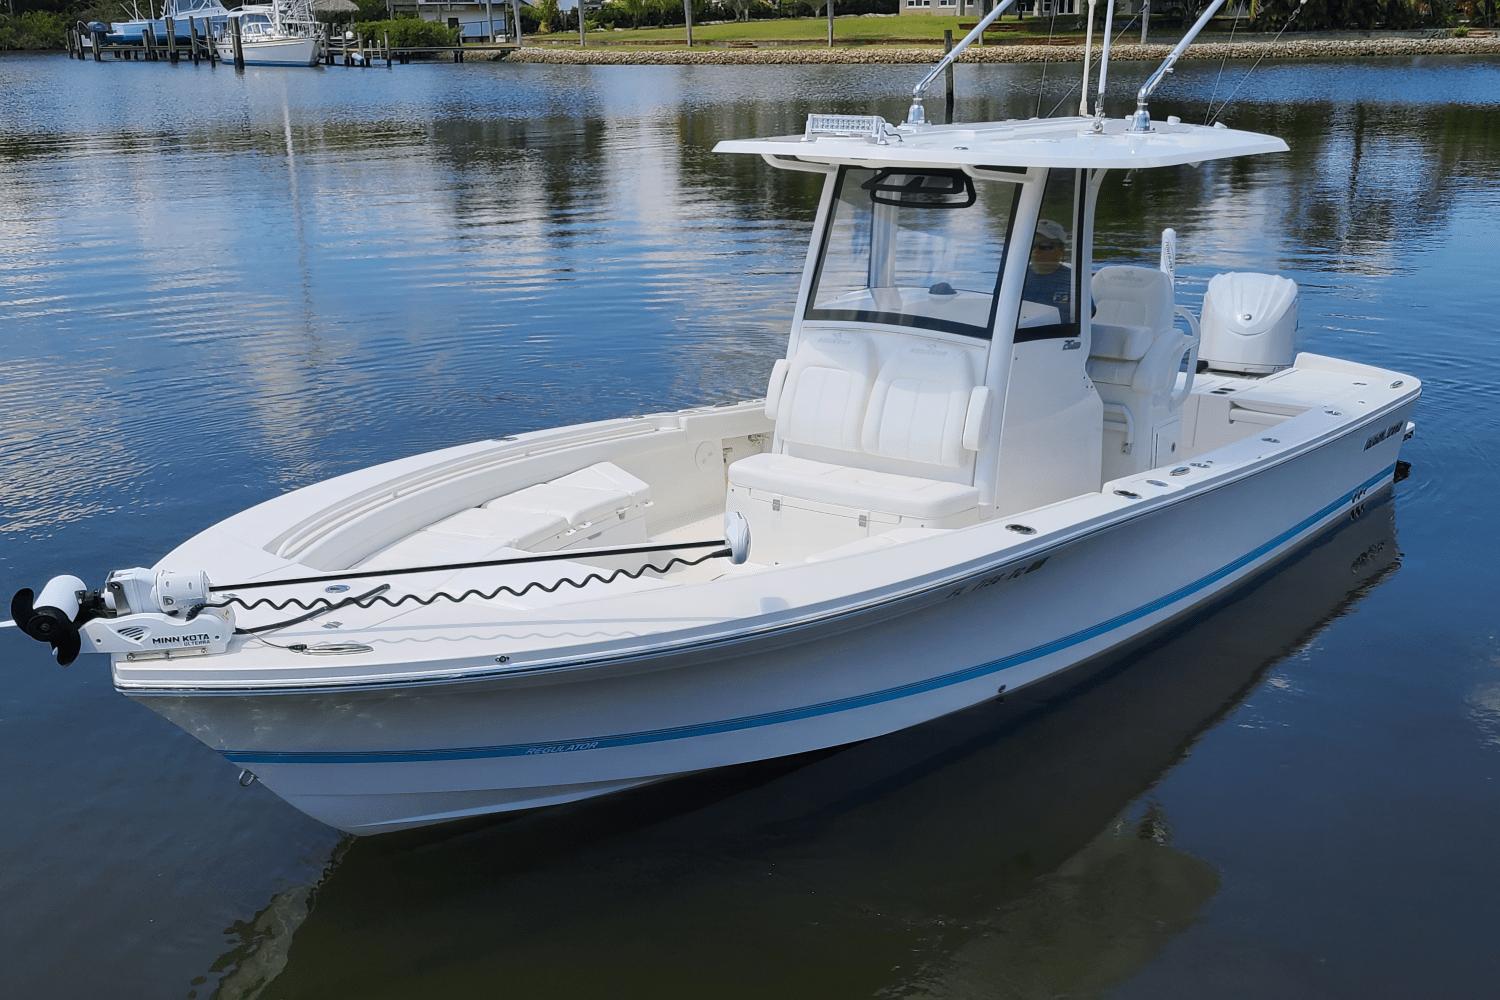 Page 16 of 250 - Used power boats for sale - boats.com